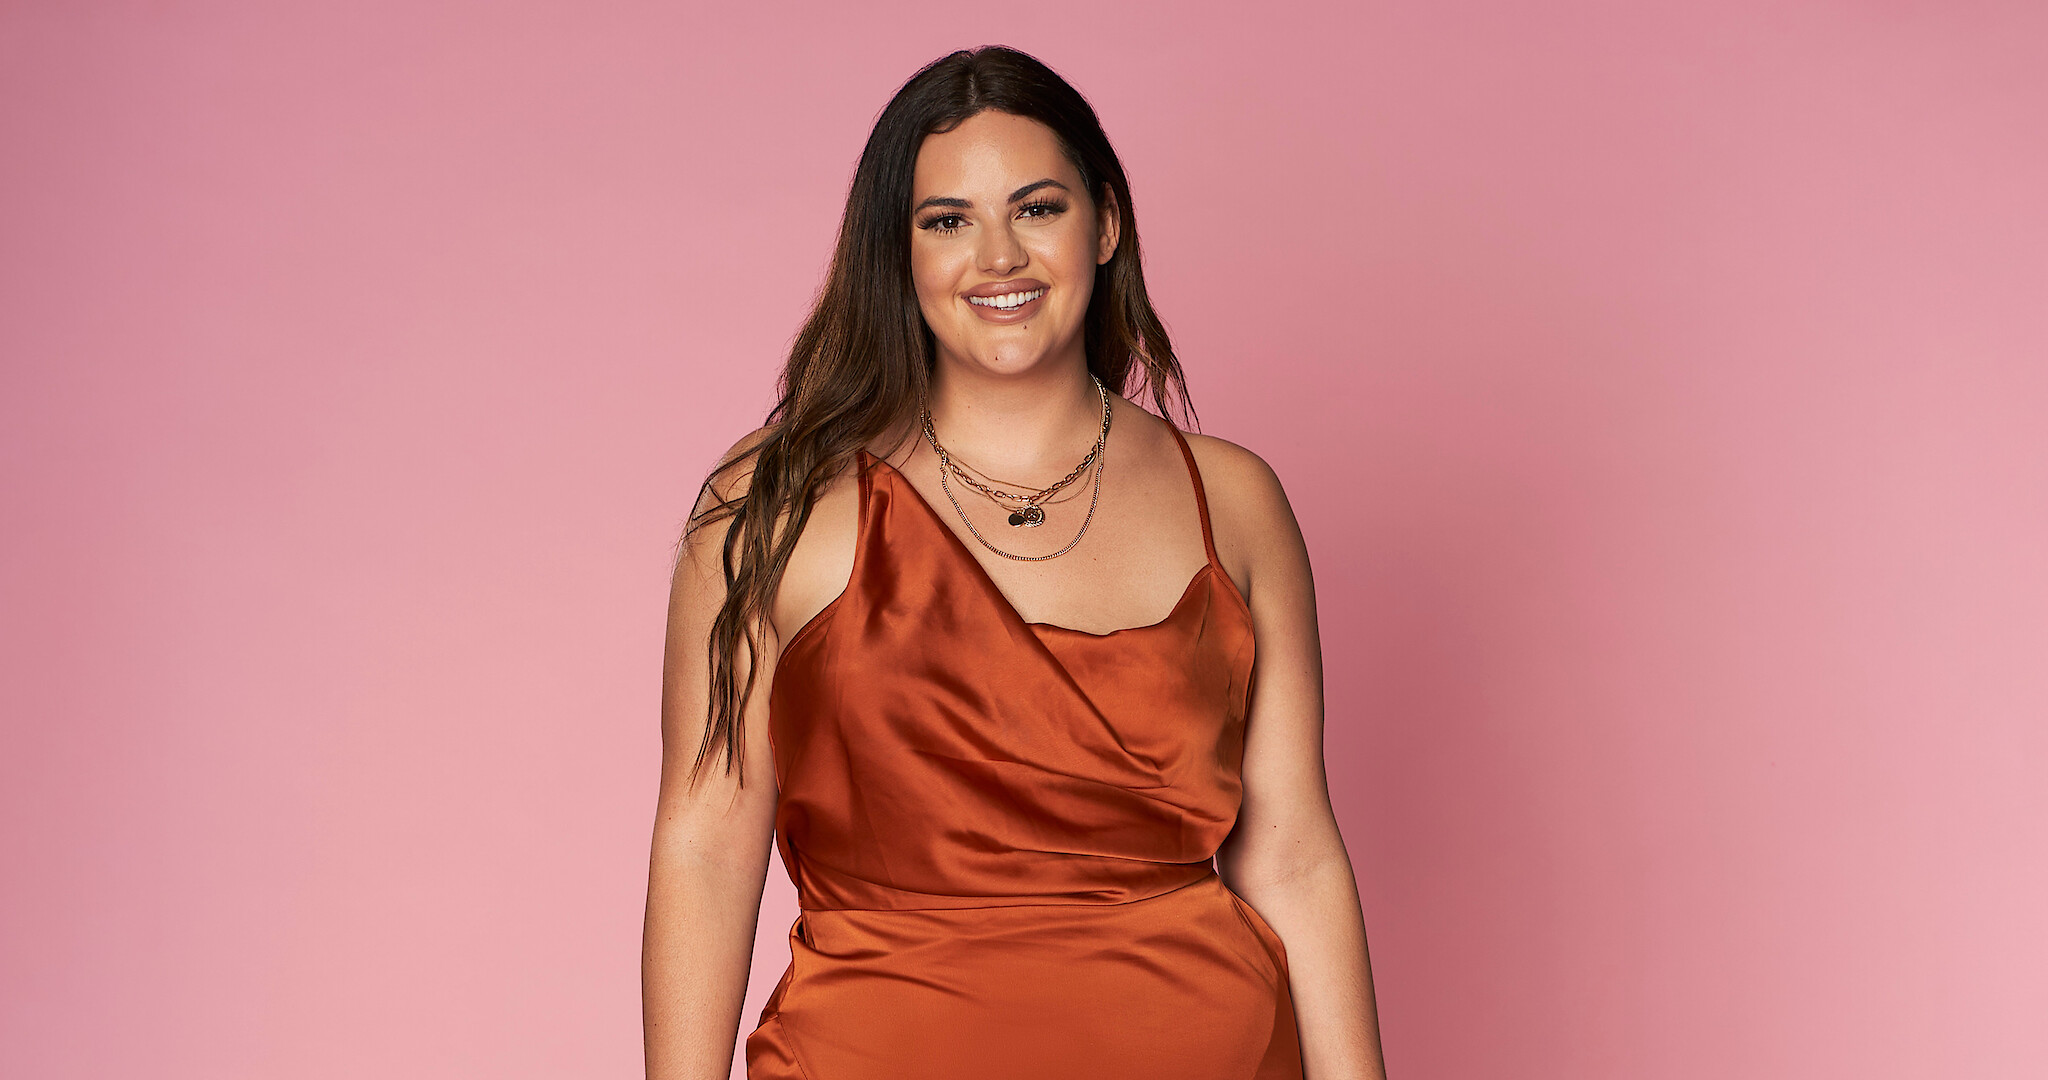 Alexa from Love is Blind Season 3 on Her Relationship with Brennon